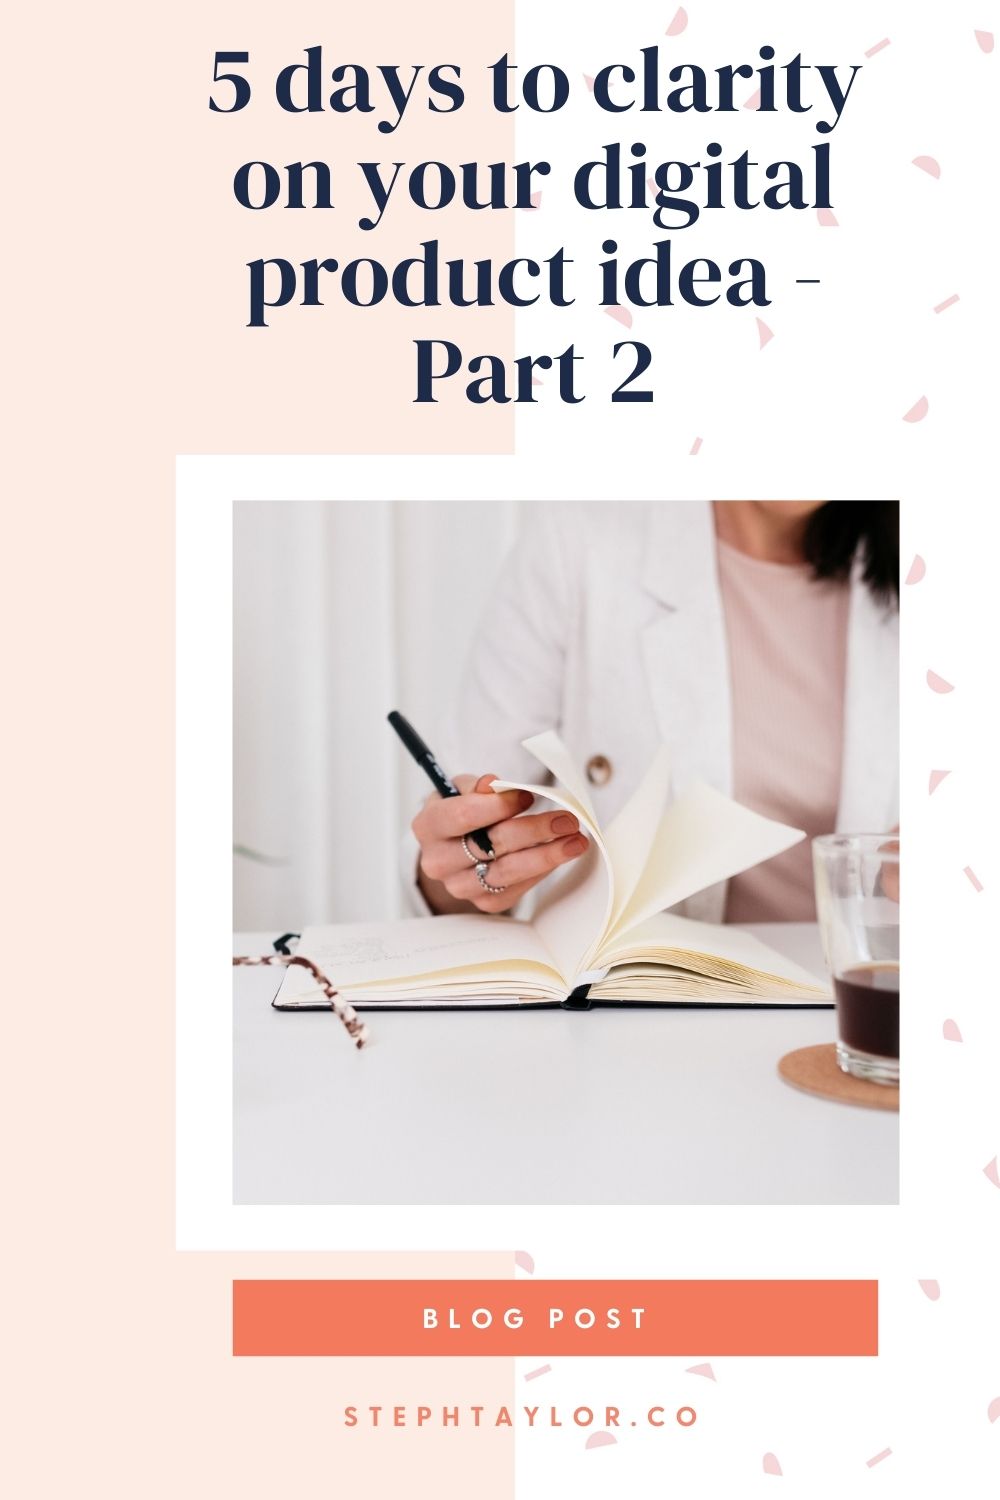 5 days to clarity on your digital product idea - Part 2